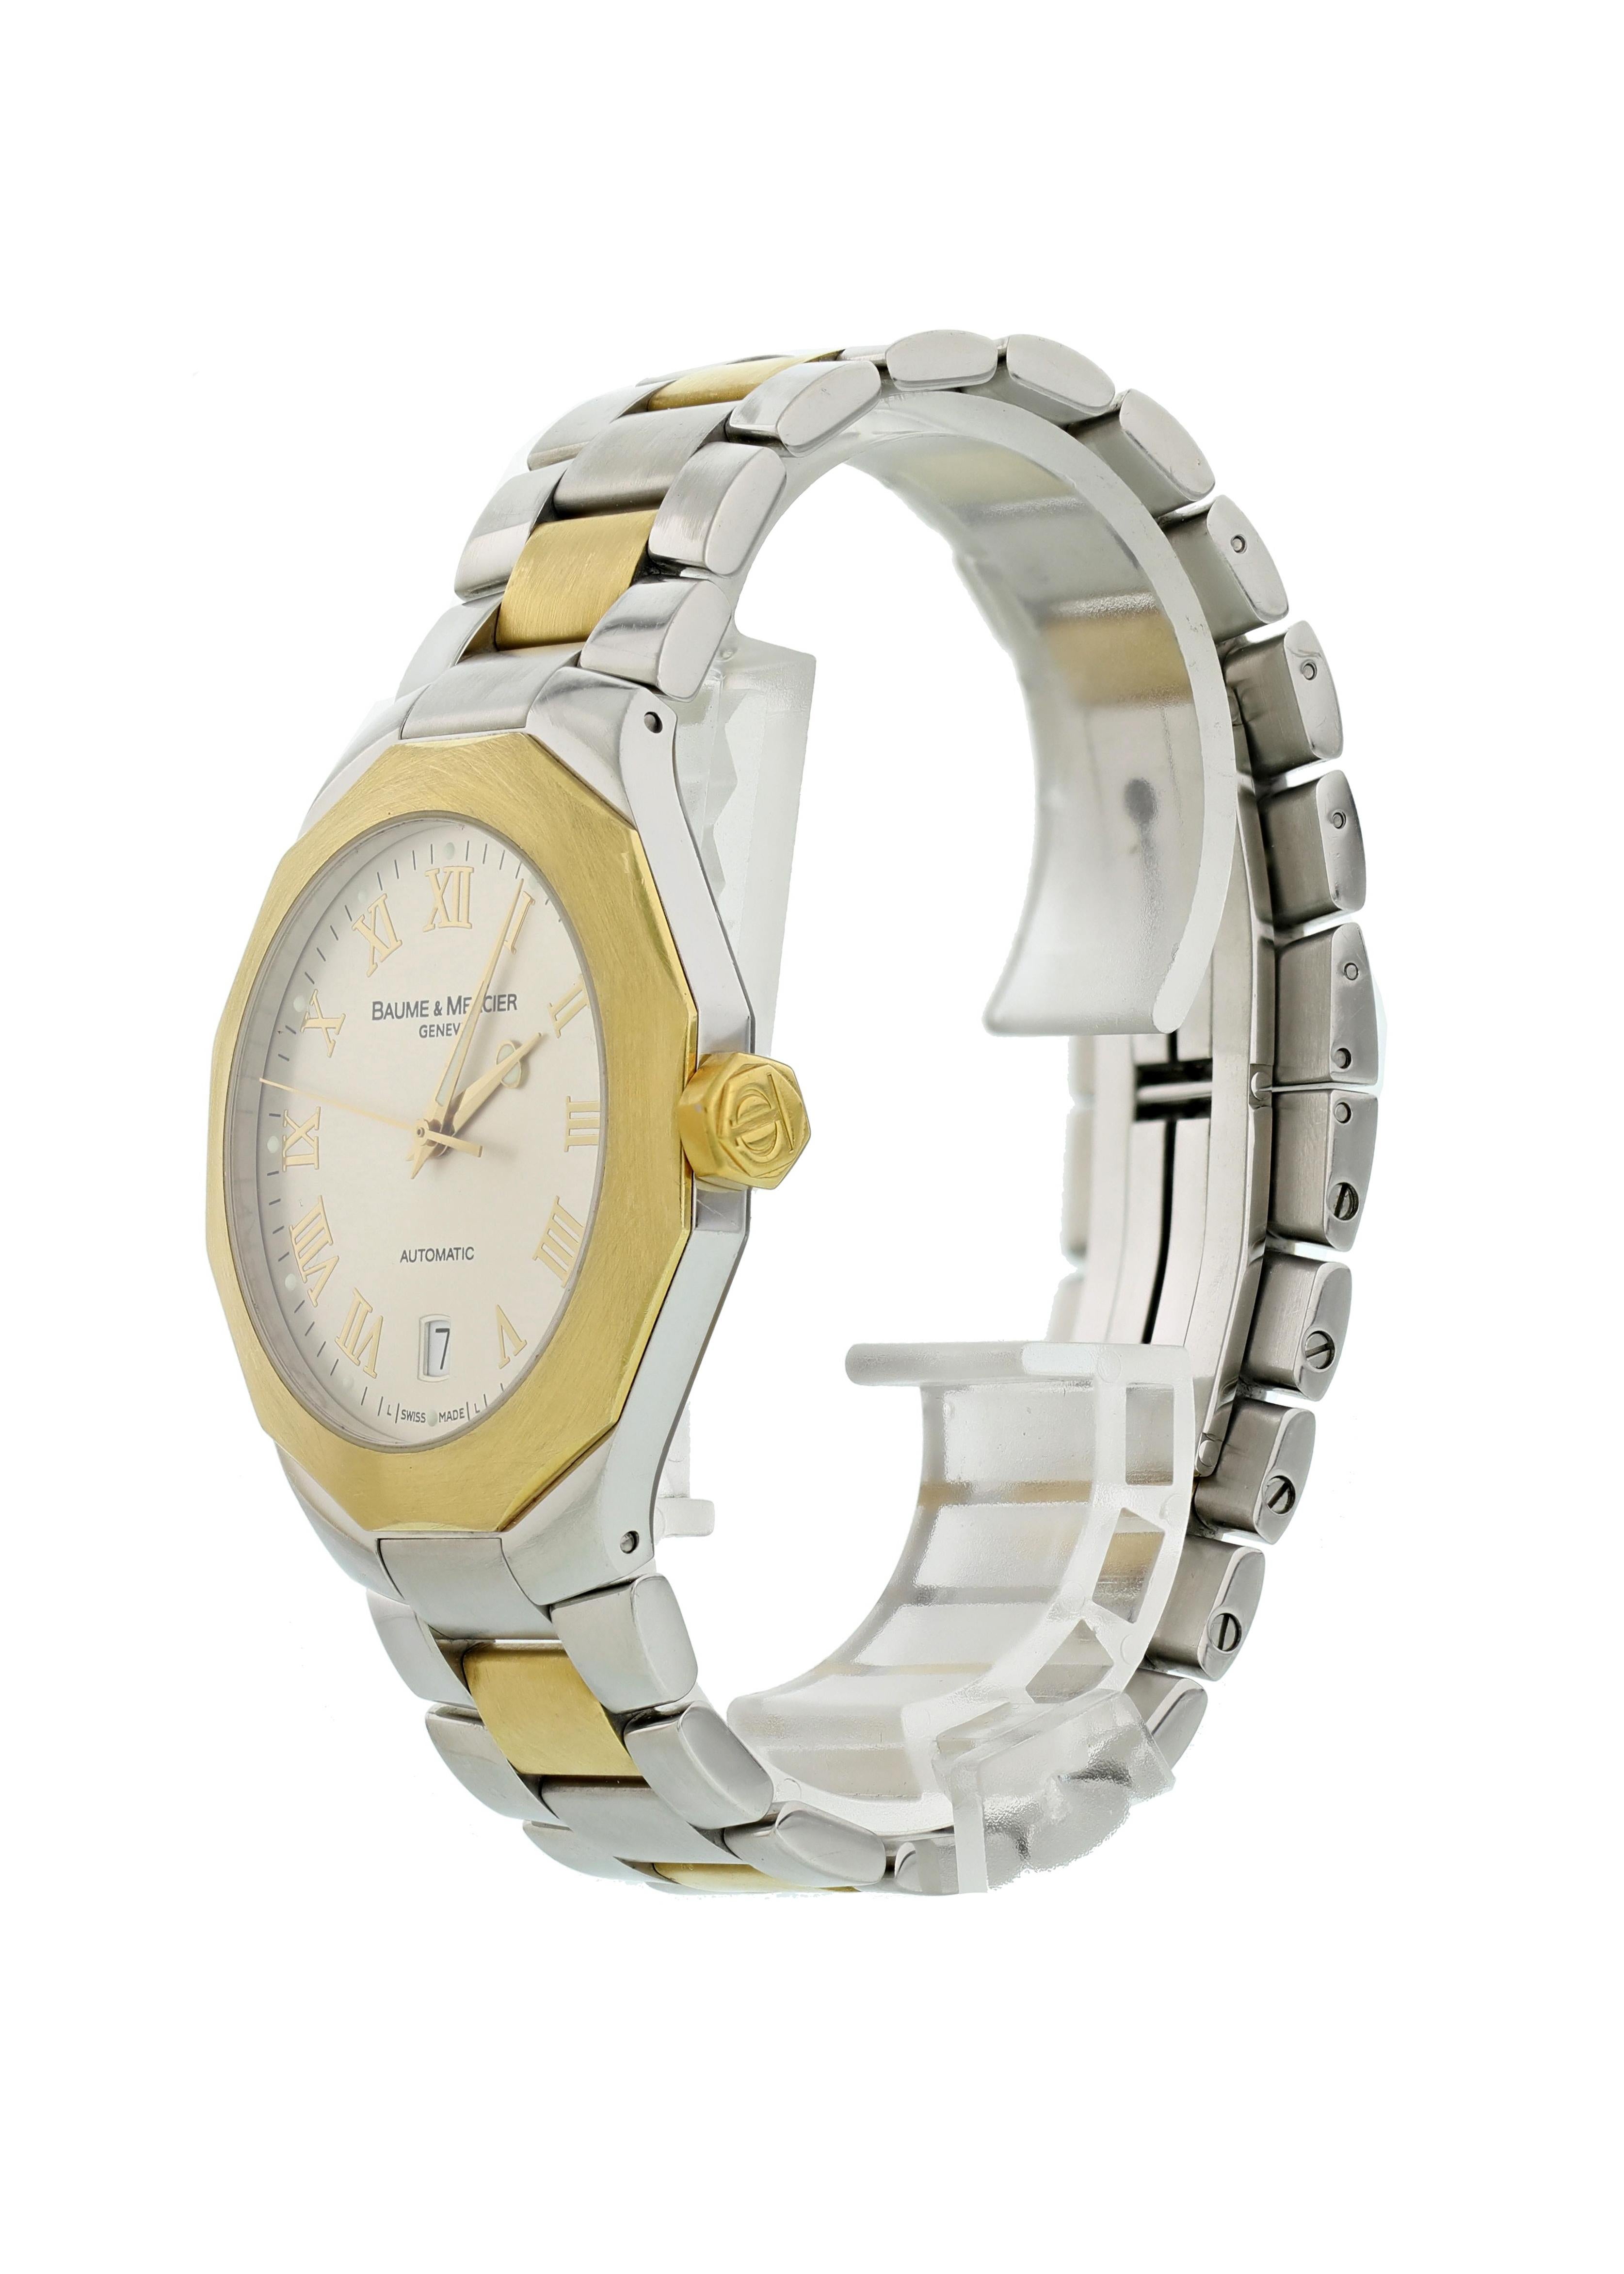 Baume & Mercier Riviera 65583 Mens Watch. 38mm Stainless steel case. 18K yellow gold dodecagon shaped fixed bezel. Silver dial with gold-tone hands and Roman numeral hour markers. Minute marker on the outer dial. Date display at the 6 o'clock